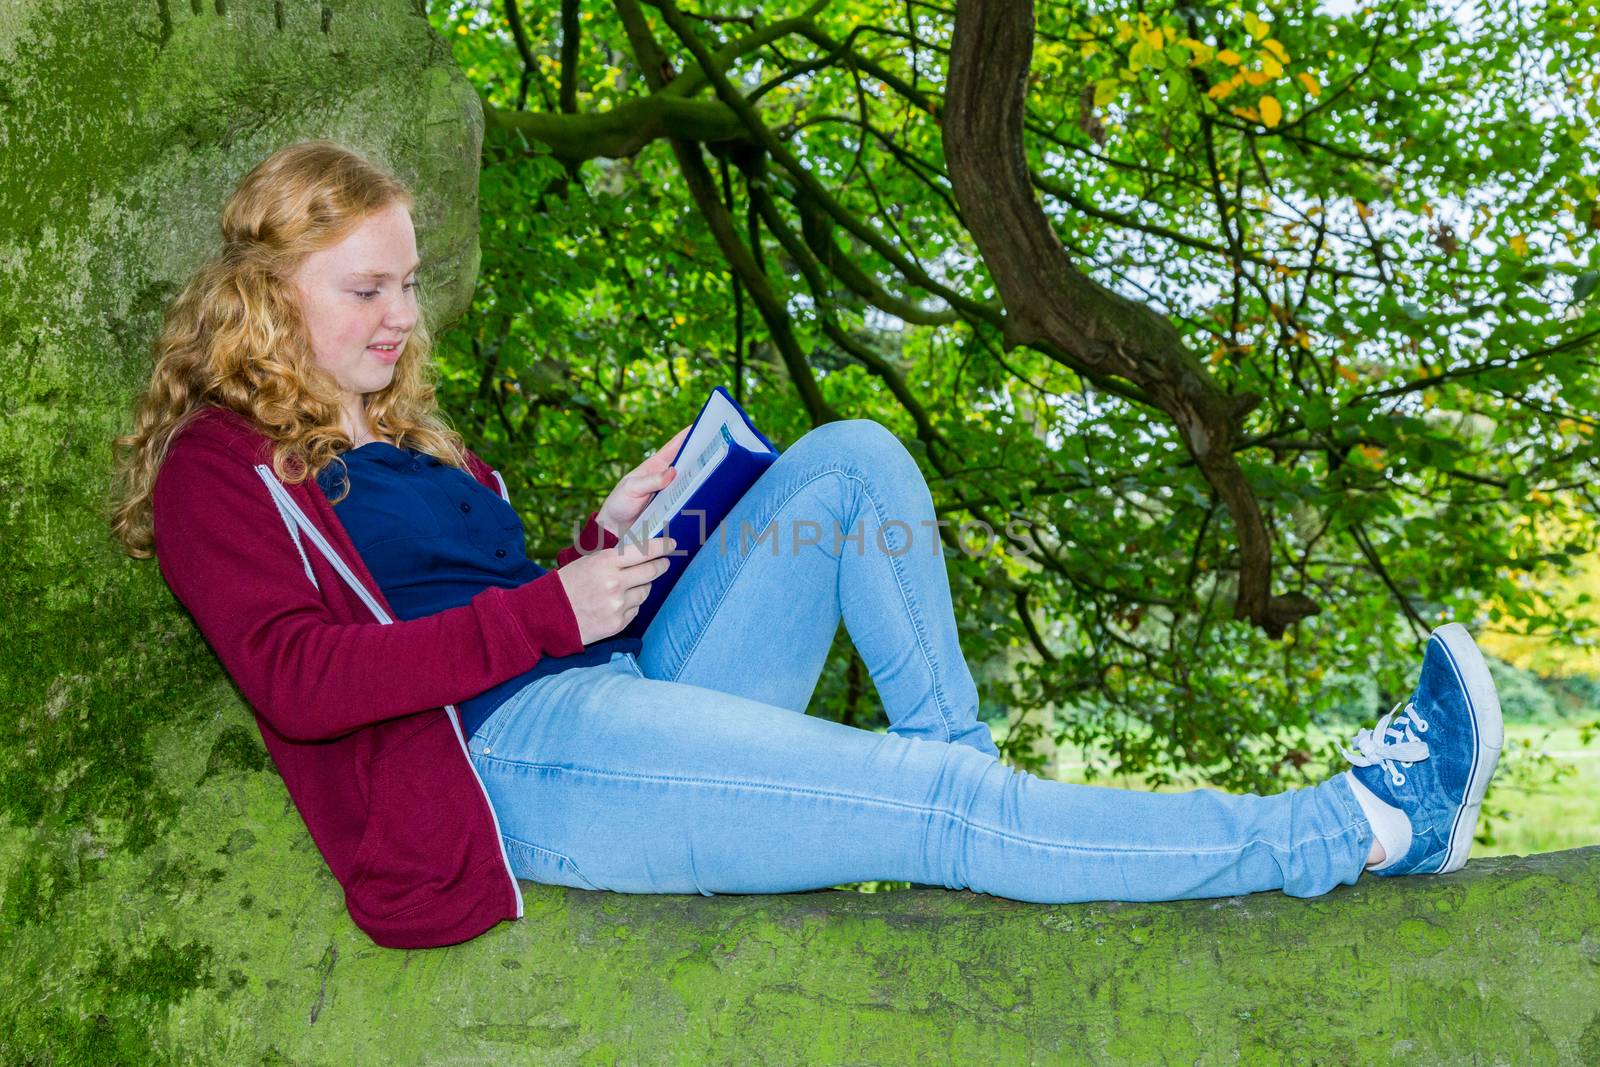 Caucasian teenage girl with red hair lying reading book in green tree